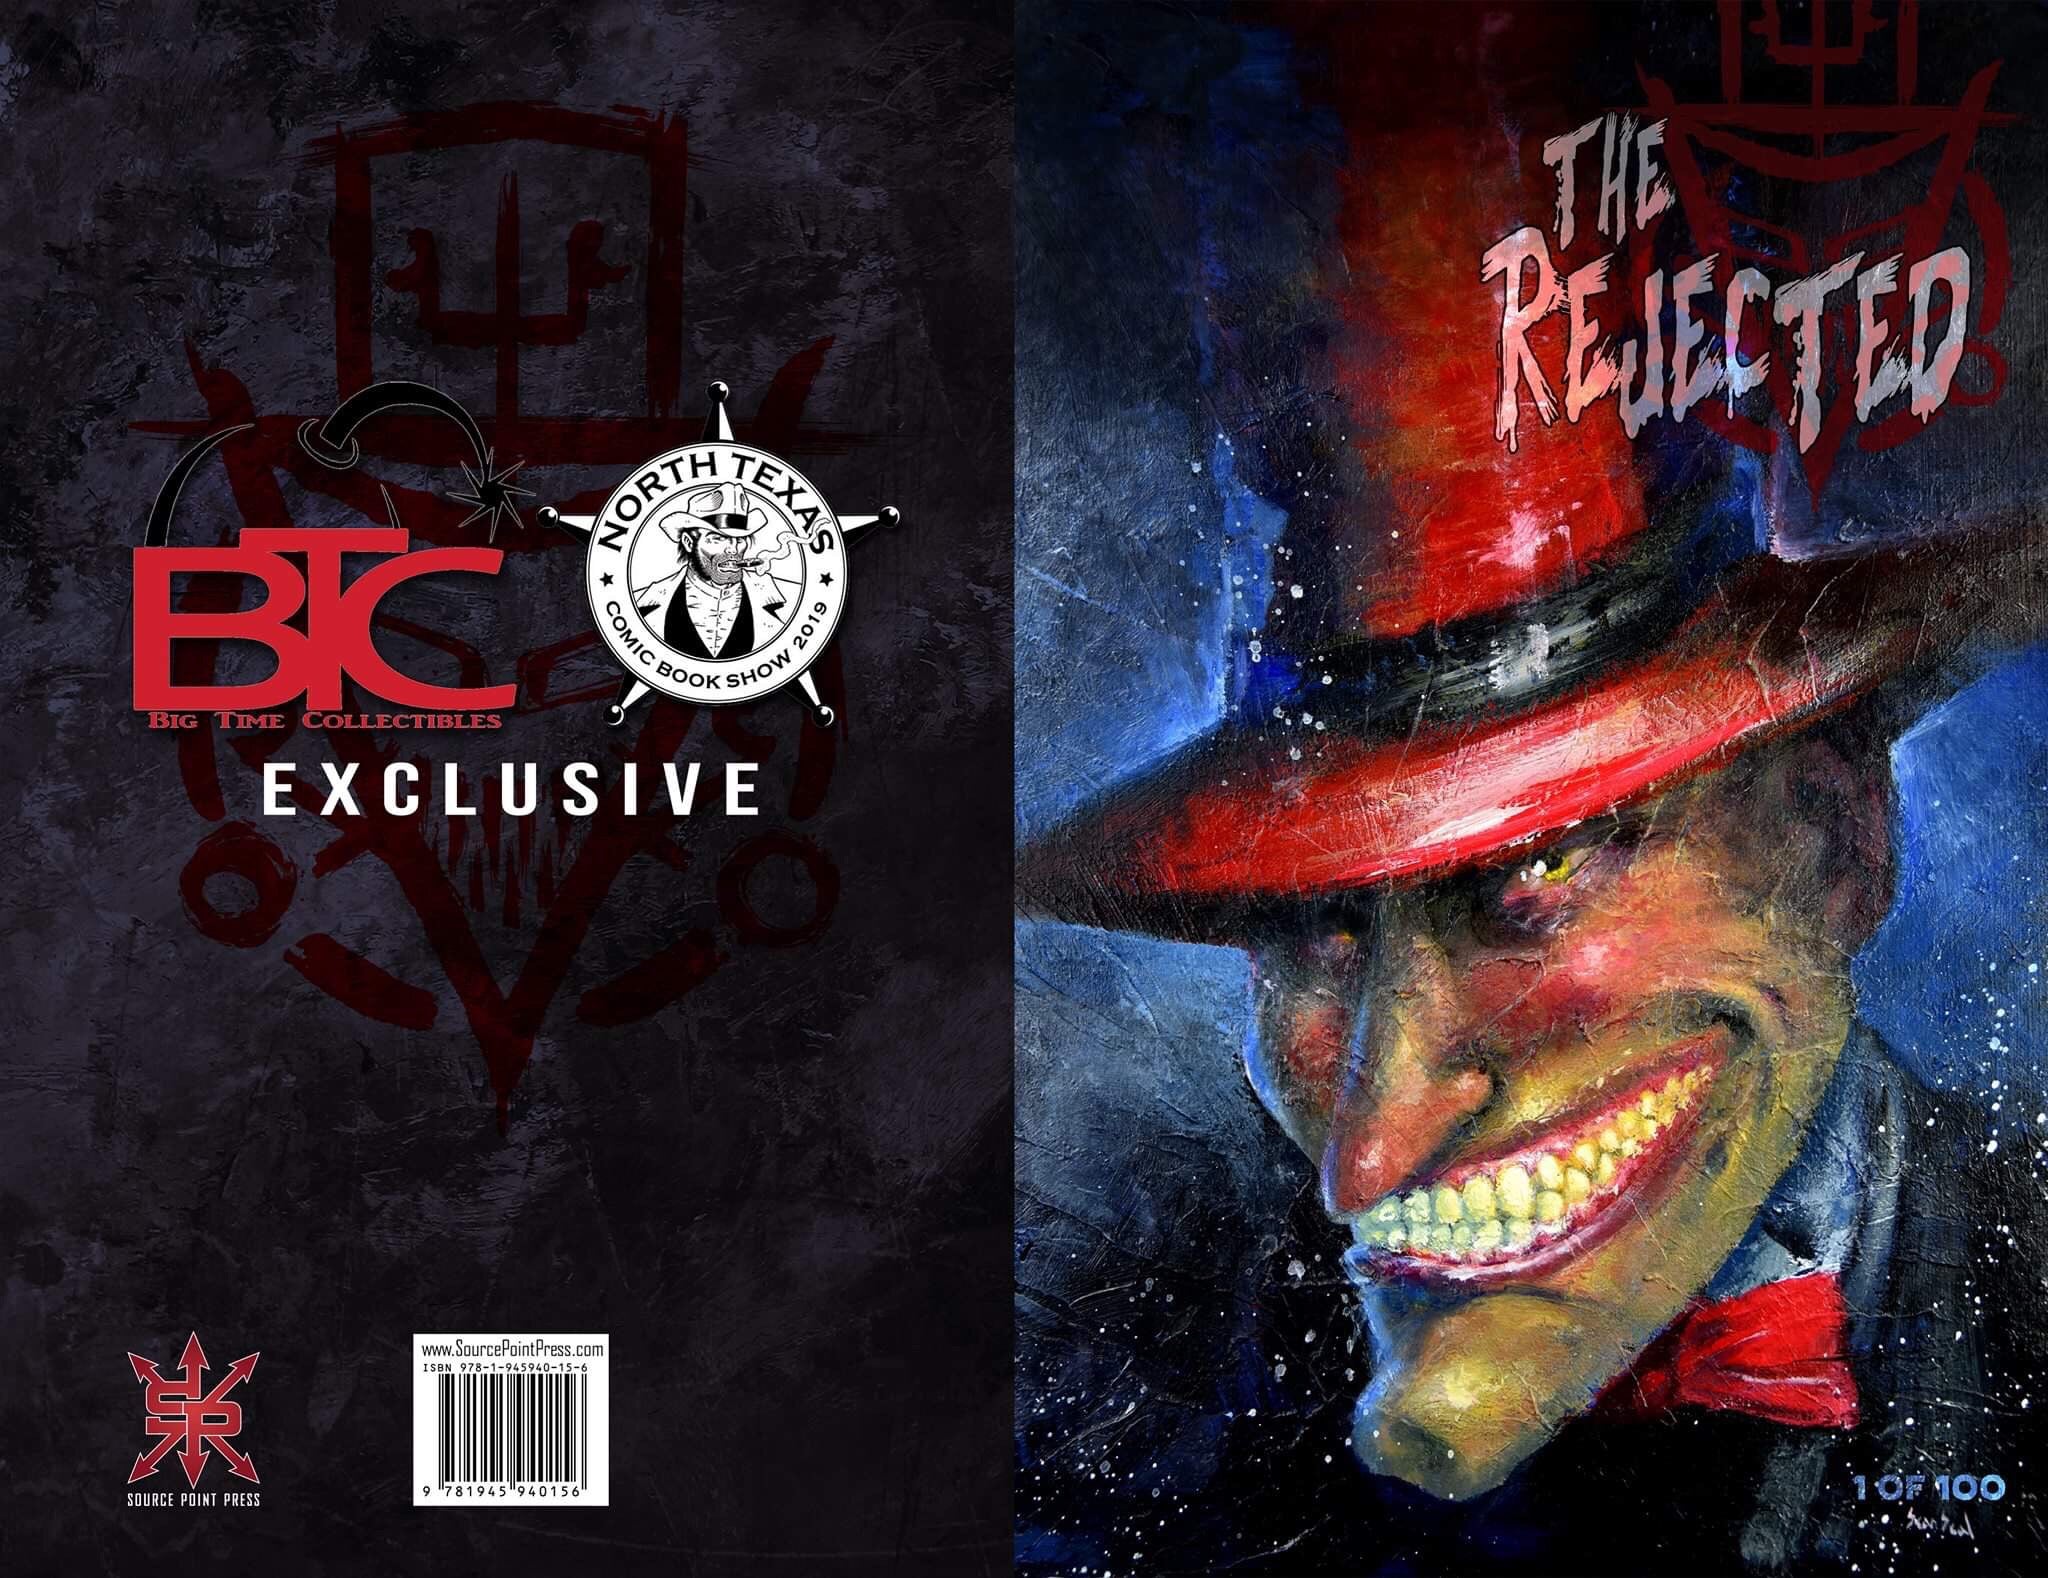 THE REJECTED #1 BTC & NTX COMIC BOOK SHOW EXCLUSIVE LTD TO 100